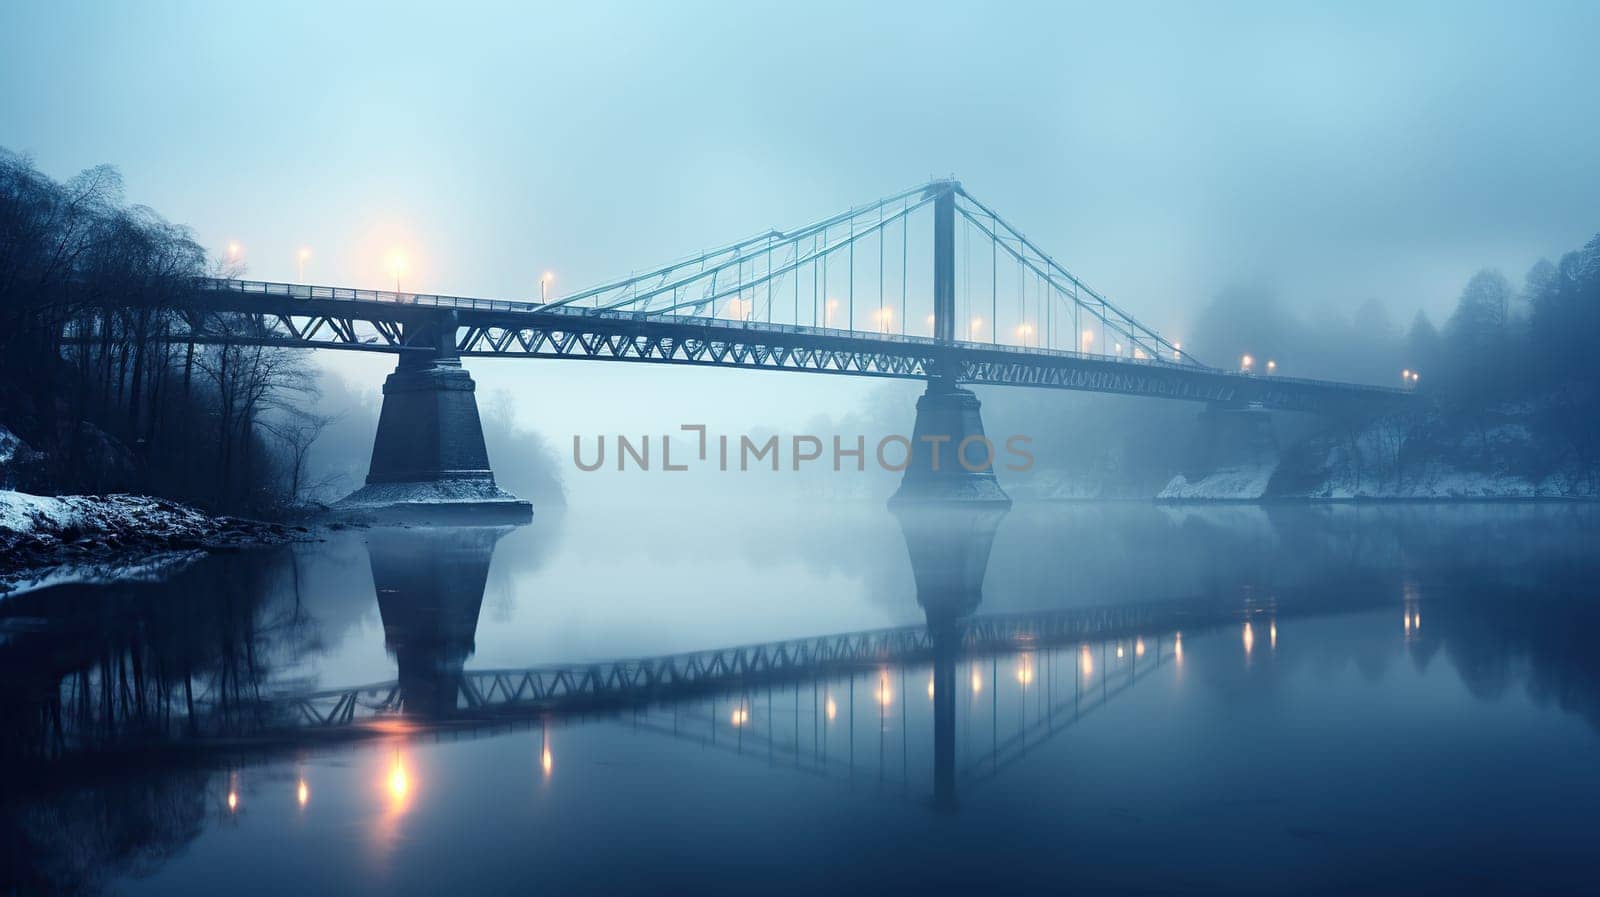 A beautiful bridge with arches over the water in thick morning fog.